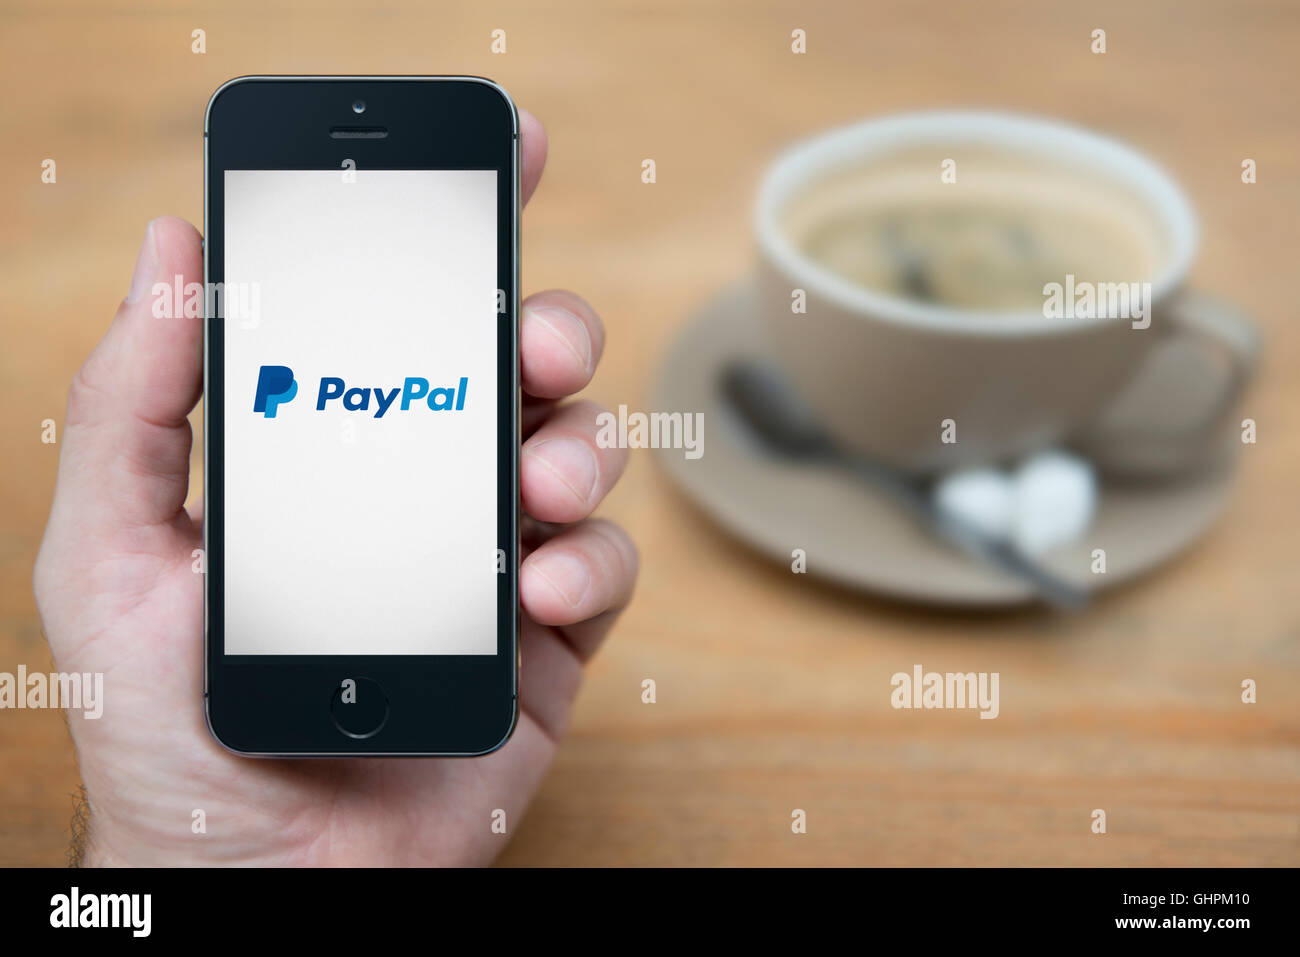 A man looks at his iPhone which displays the PayPal logo, while sat with a cup of coffee (Editorial use only). Stock Photo